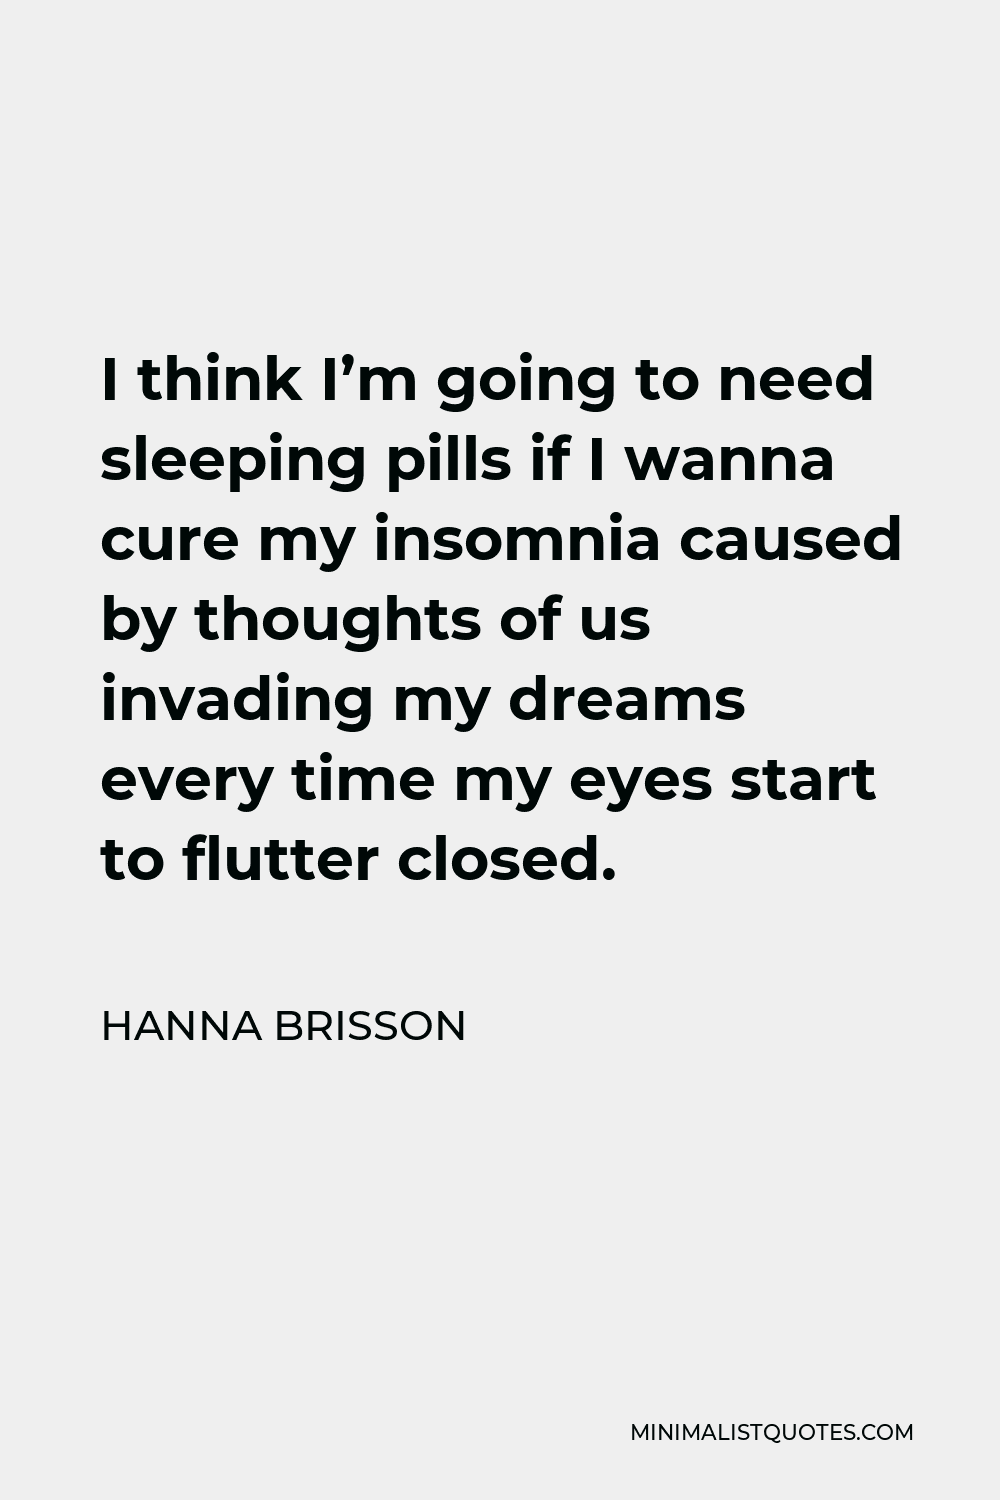 Hanna Brisson Quote - I think I’m going to need sleeping pills if I wanna cure my insomnia caused by thoughts of us invading my dreams every time my eyes start to flutter closed.